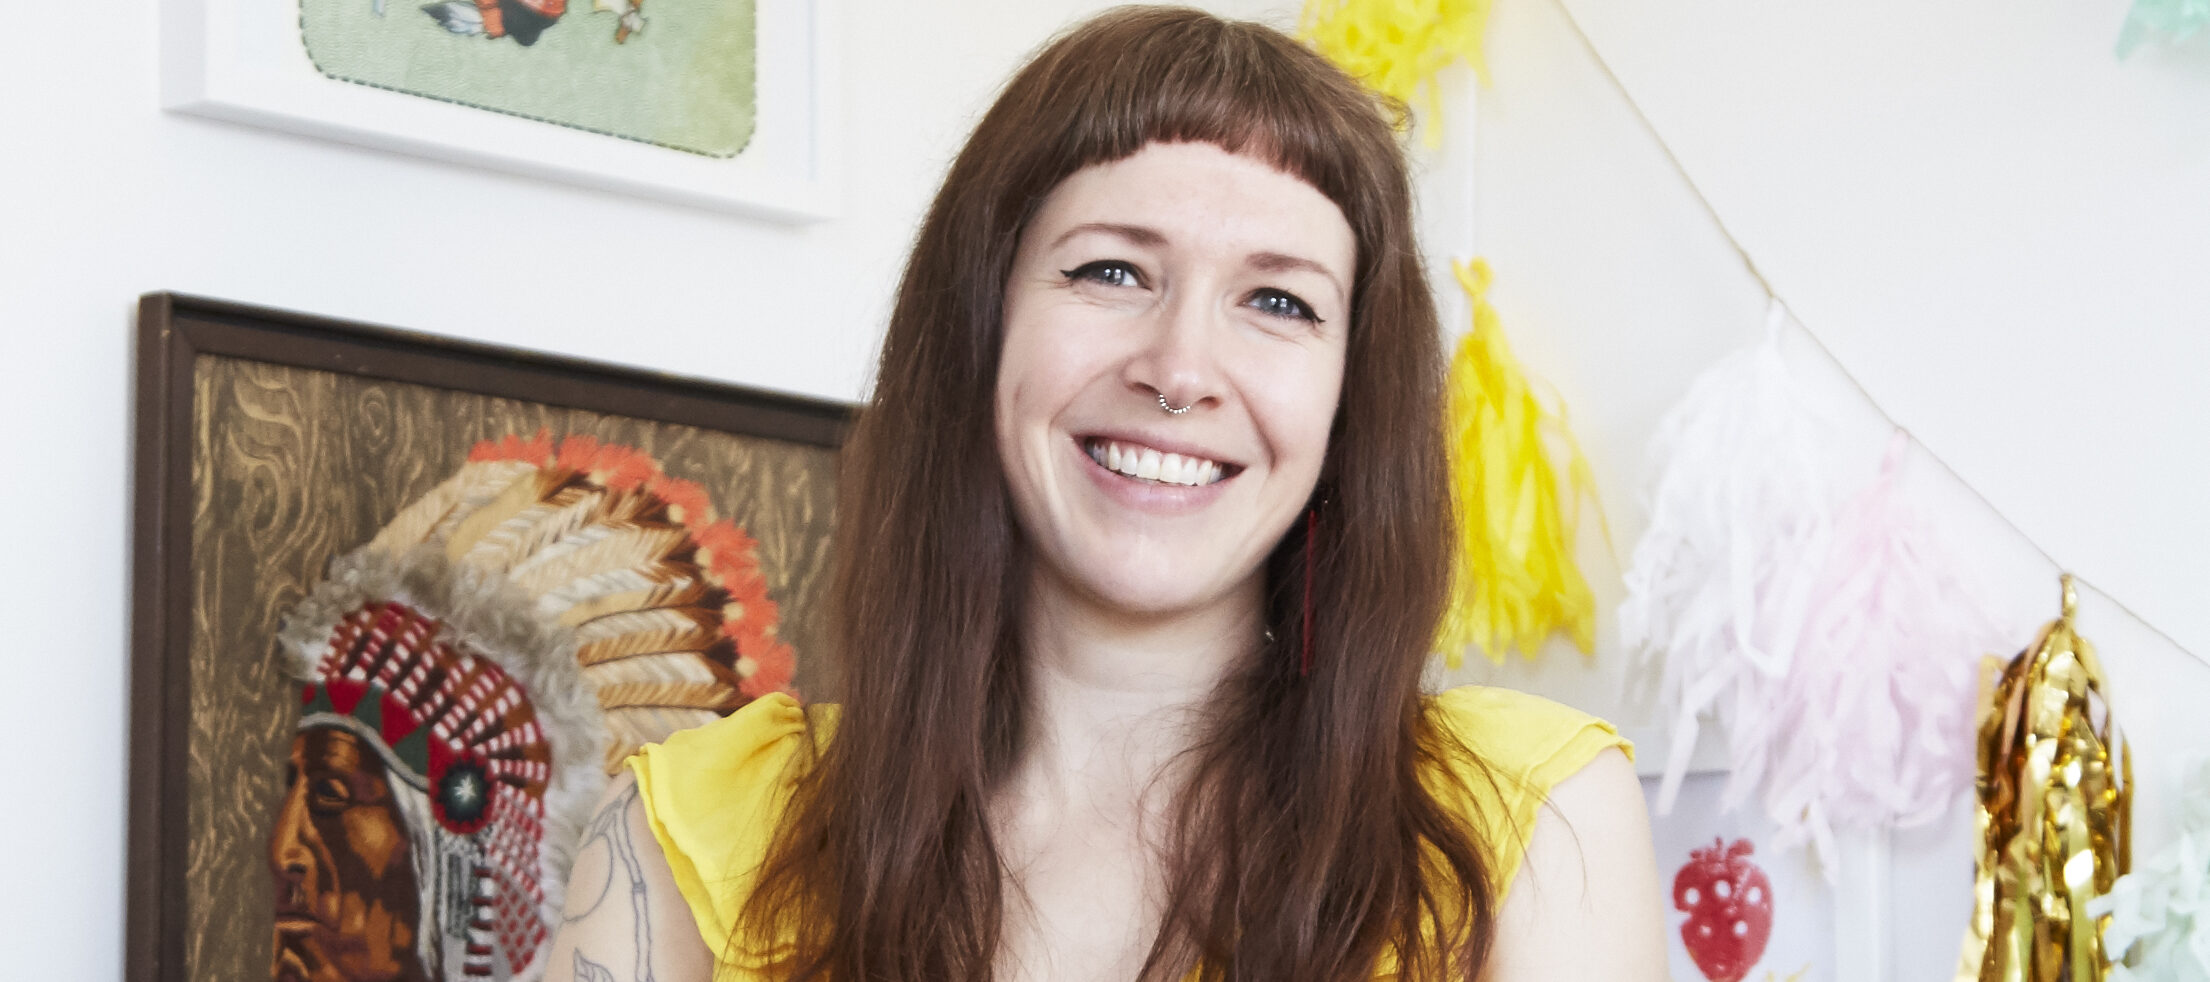 A light-skinned woman leans against a desk, smiling happily at the camera. She has straight, light-brown hair worn long to her breasts, with straight-cut bangs worn high on her forehead. She wears a yellow dress with ruffled sleeves and both arms have various tattoos. Behind her are various prints and artworks, most prominently an illustration of a Native American Chief in a headdress, shown in profile.